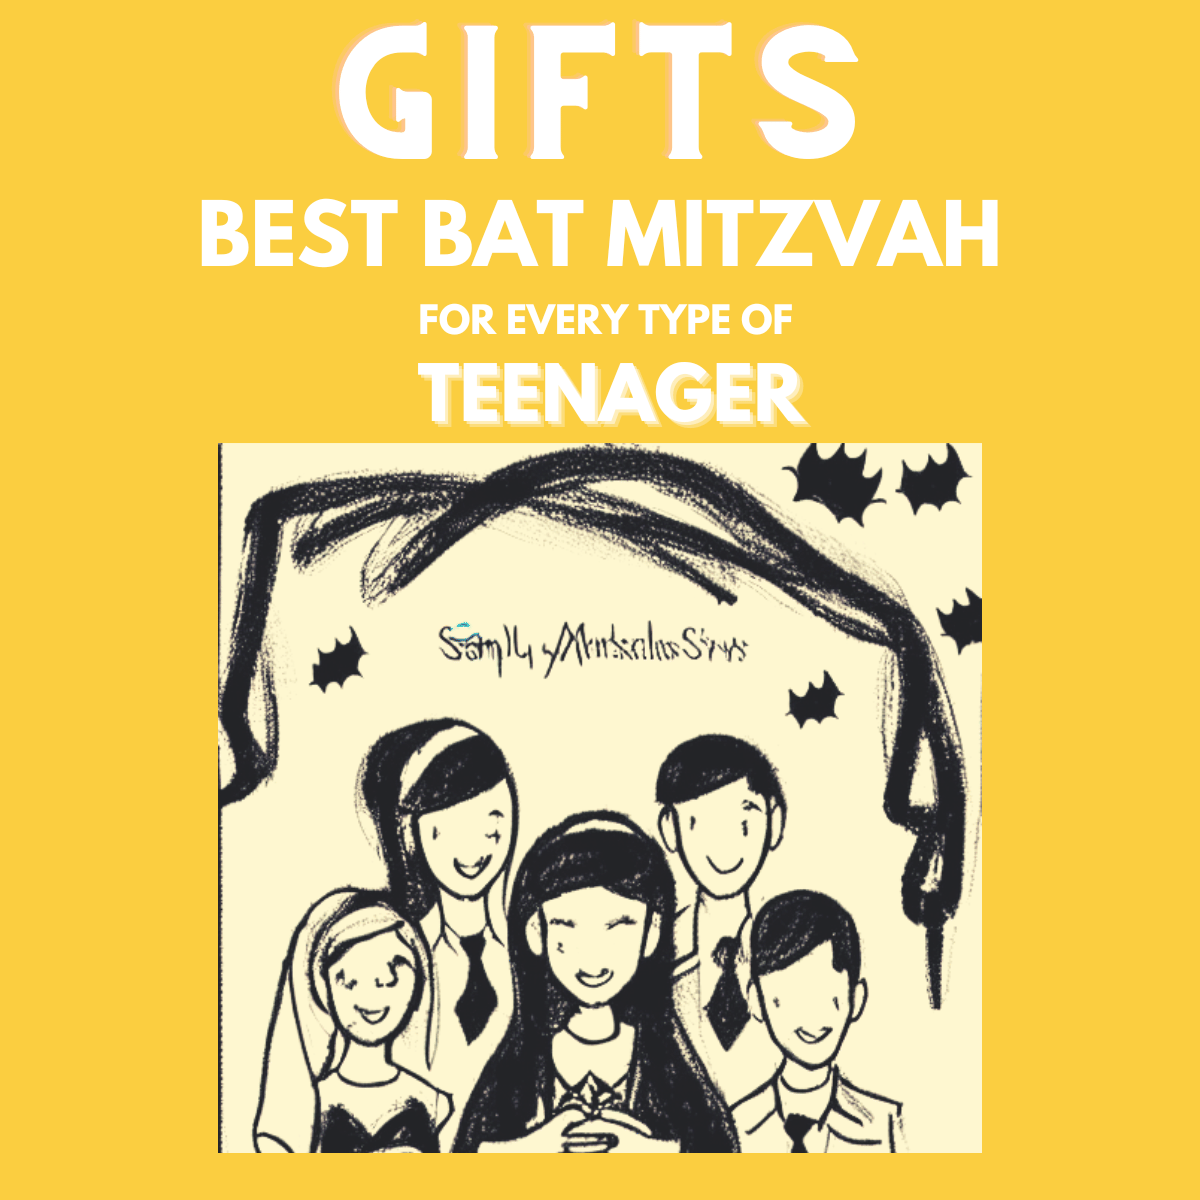 The Best Bat Mitzvah Gifts for every type of teenager